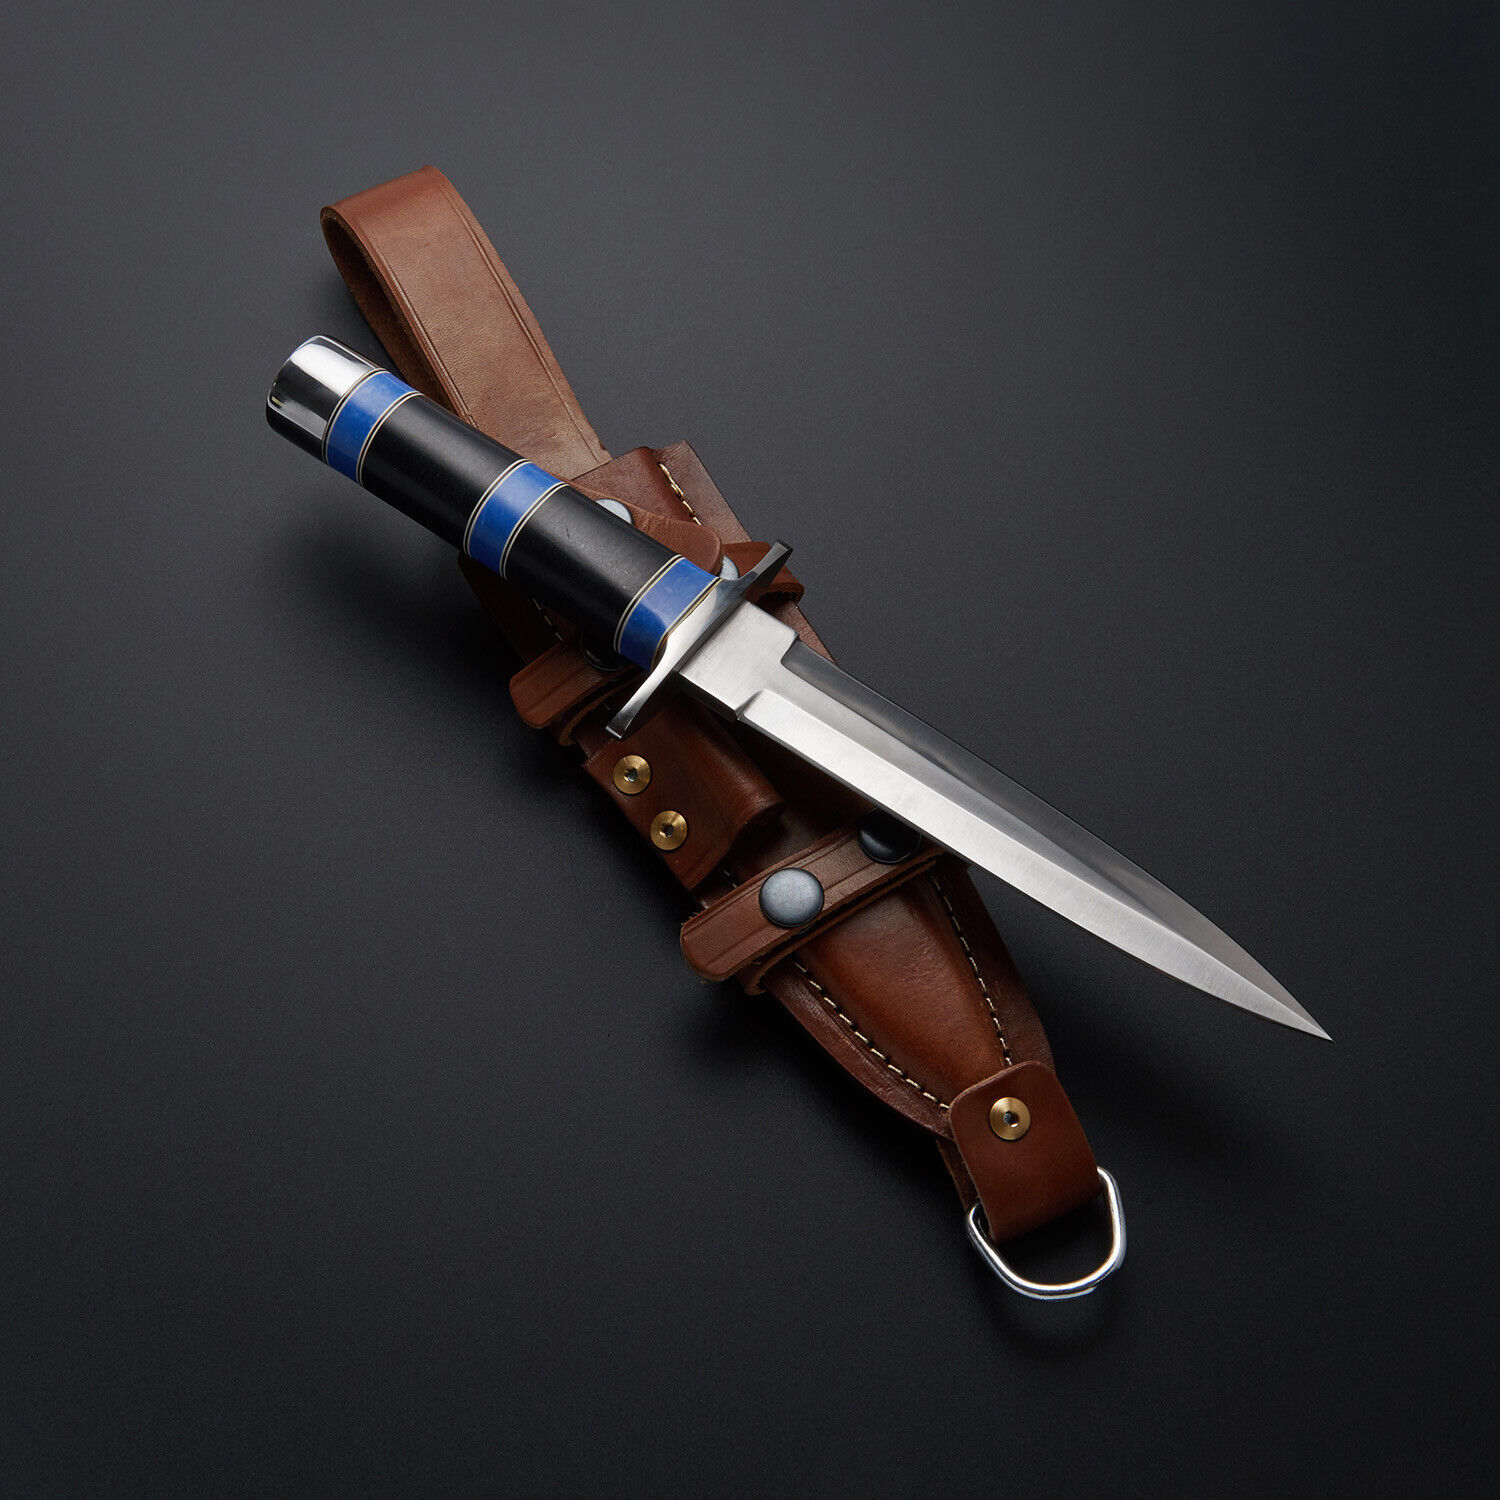 Primary image for HANDCRAFTED D2 STEEL CUSTOMIZED DOUBLE EDGE DAGGER HUNTING SURVIVAL KNIFE